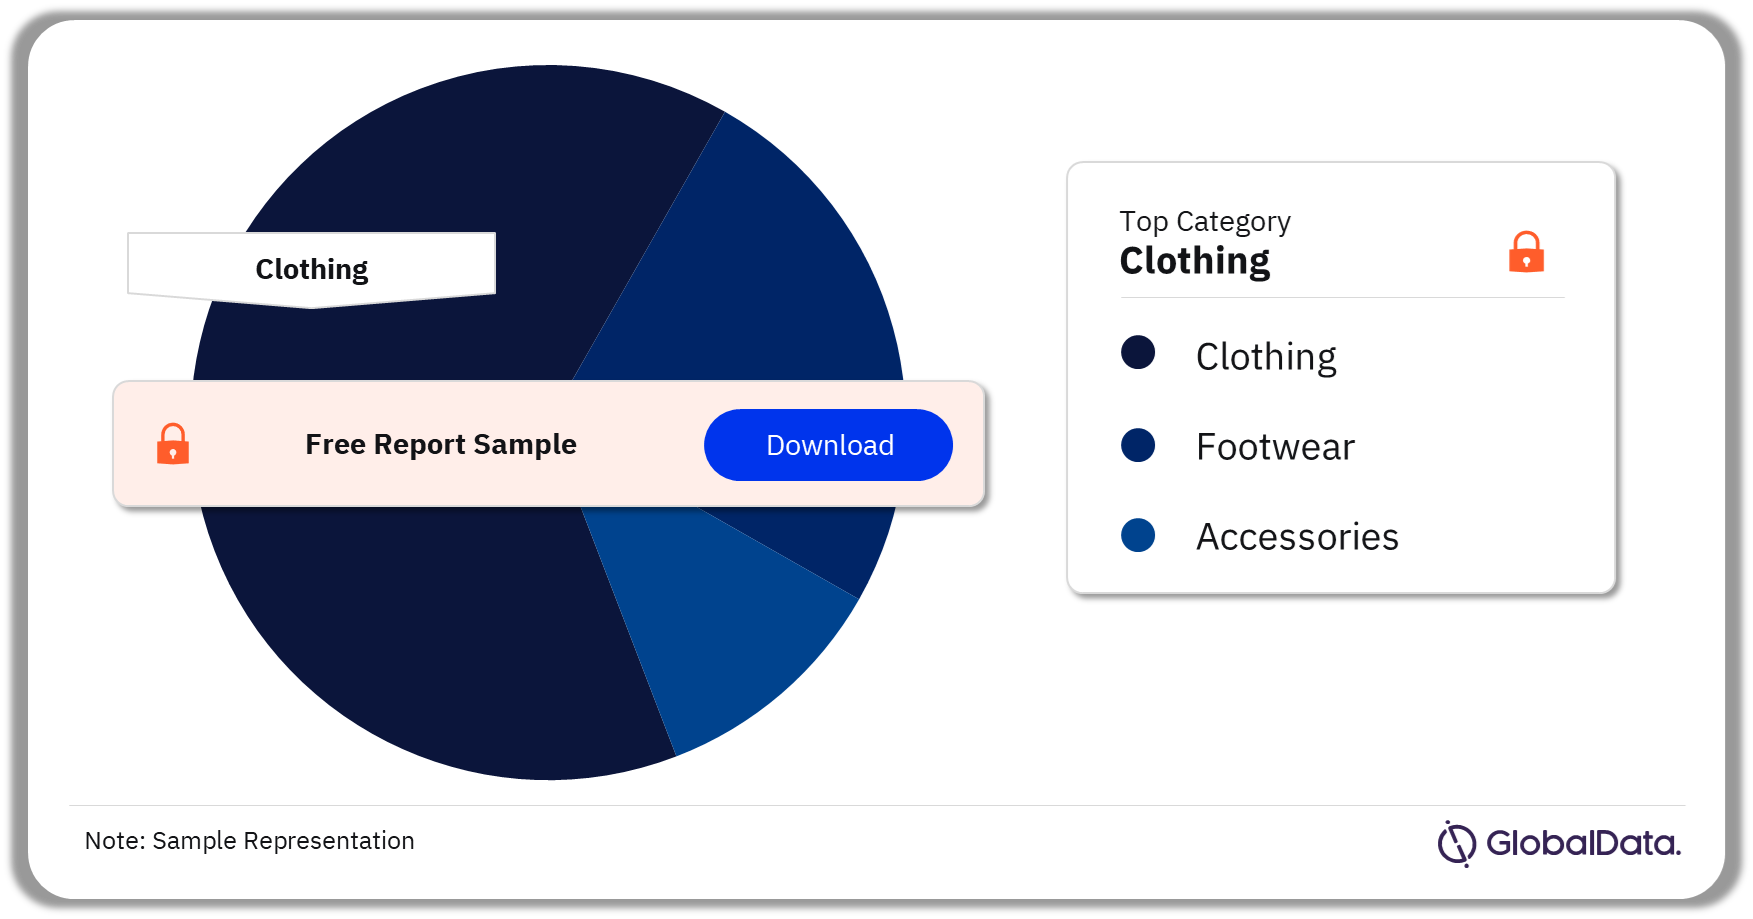 Luxury Apparel Market Analysis by Categories, 2020 (%)